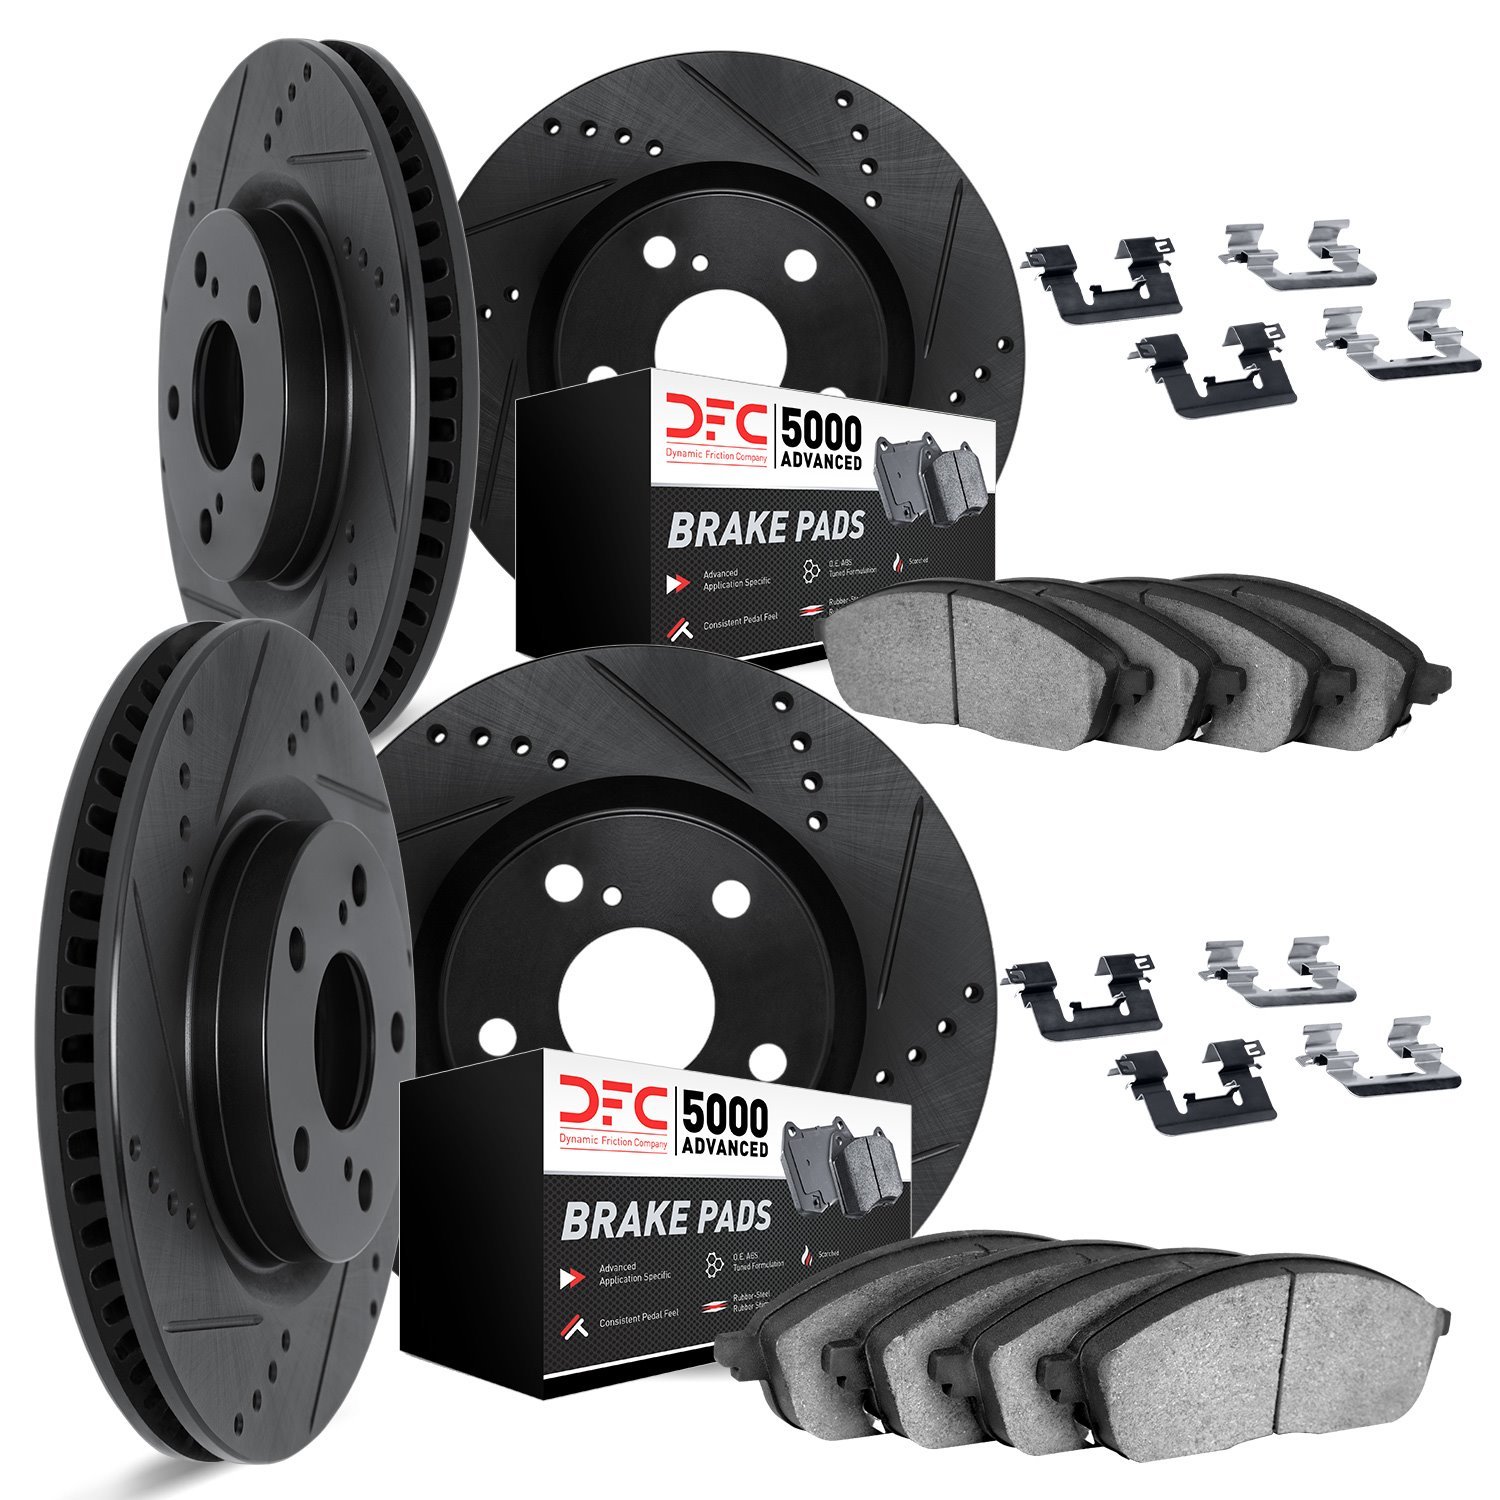 8514-31058 Drilled/Slotted Brake Rotors w/5000 Advanced Brake Pads Kit & Hardware [Black], 2010-2011 BMW, Position: Front and Re